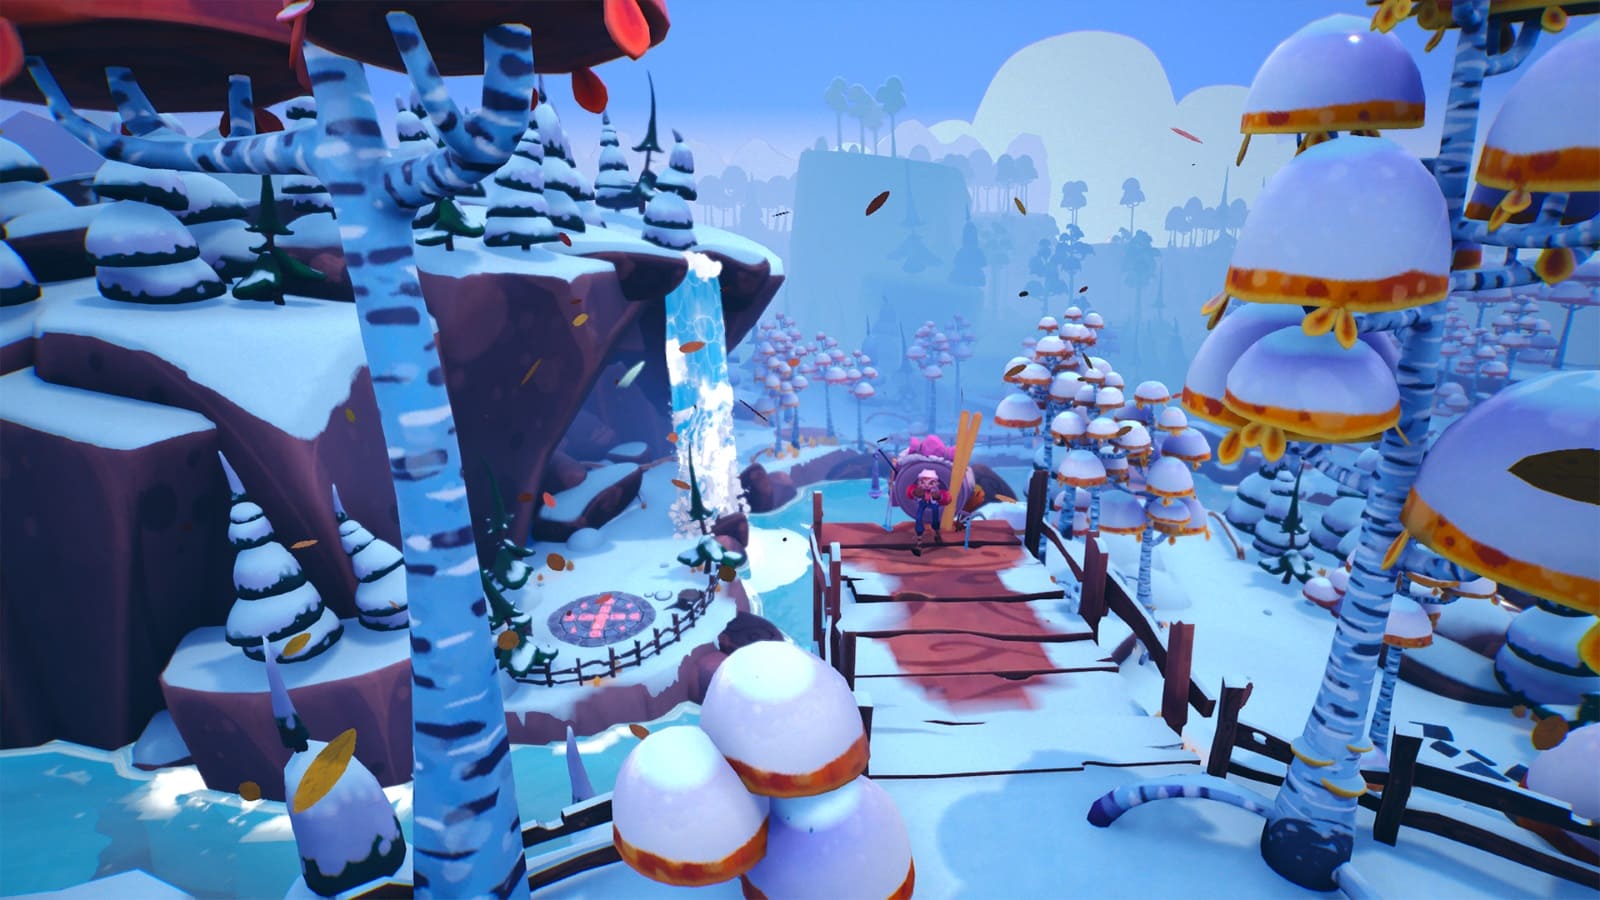 Ikku faces an arctic world and must reach the top of the mountain